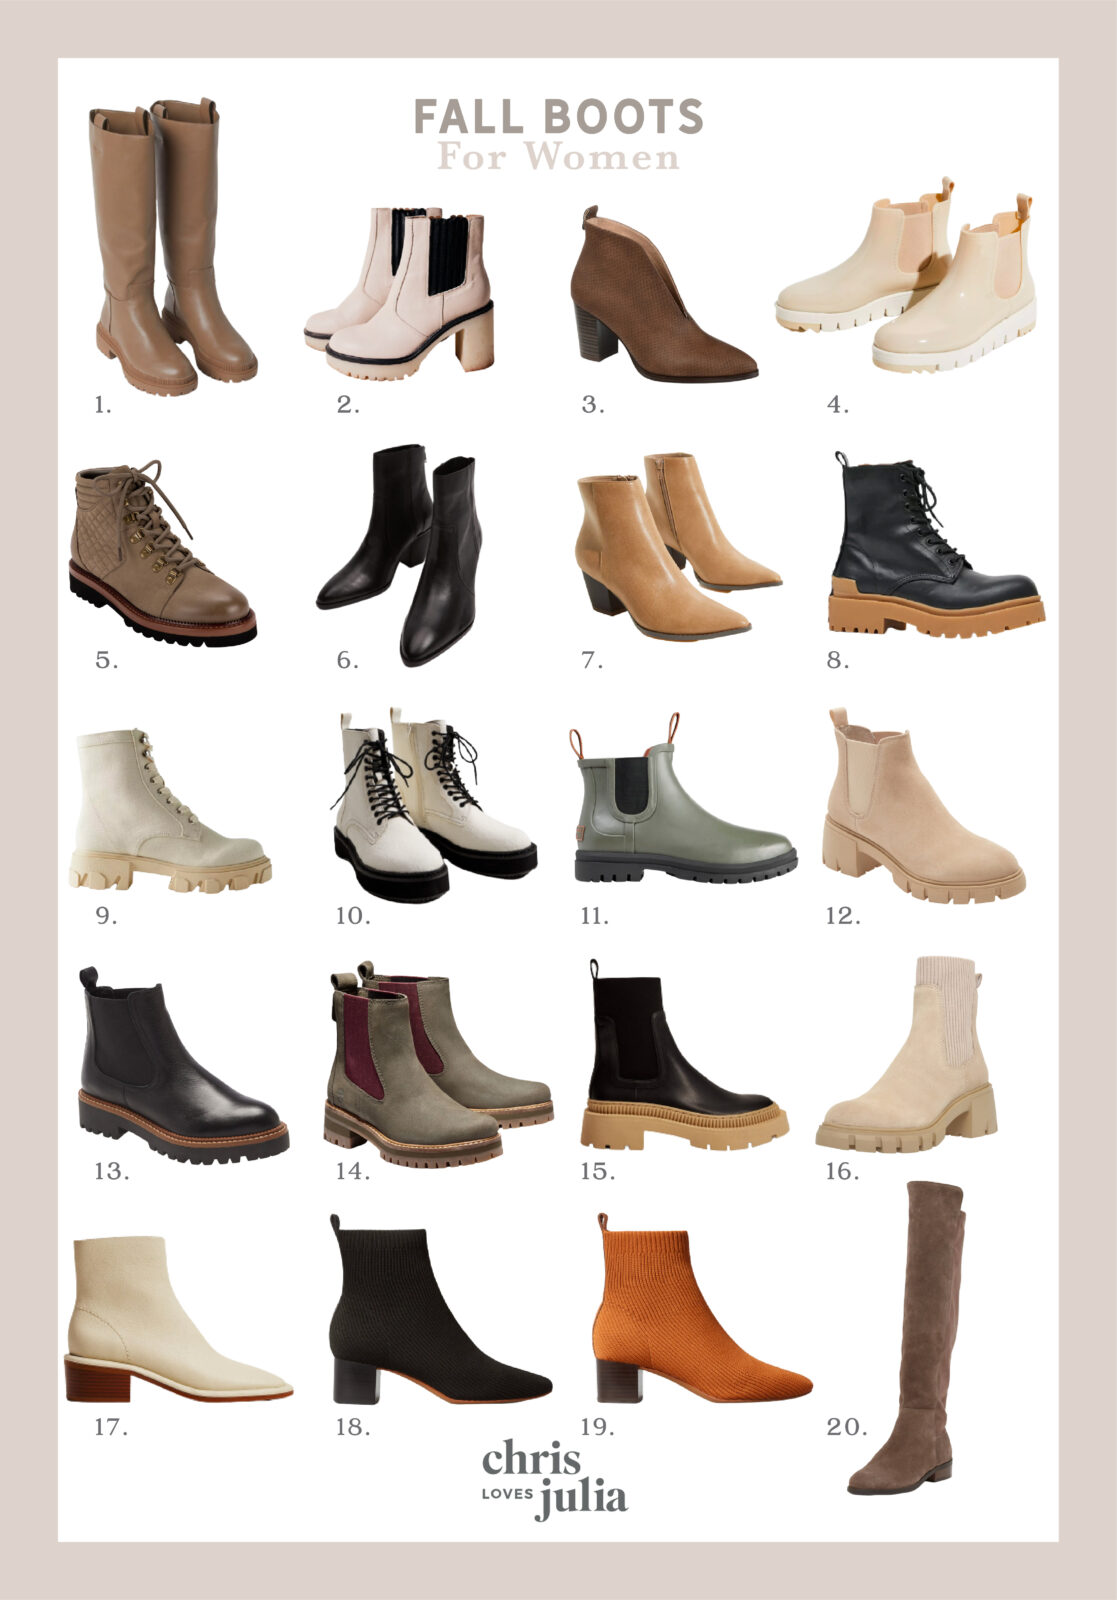 Casual Friday: Our Favorite Fall Boots - Chris Loves Julia